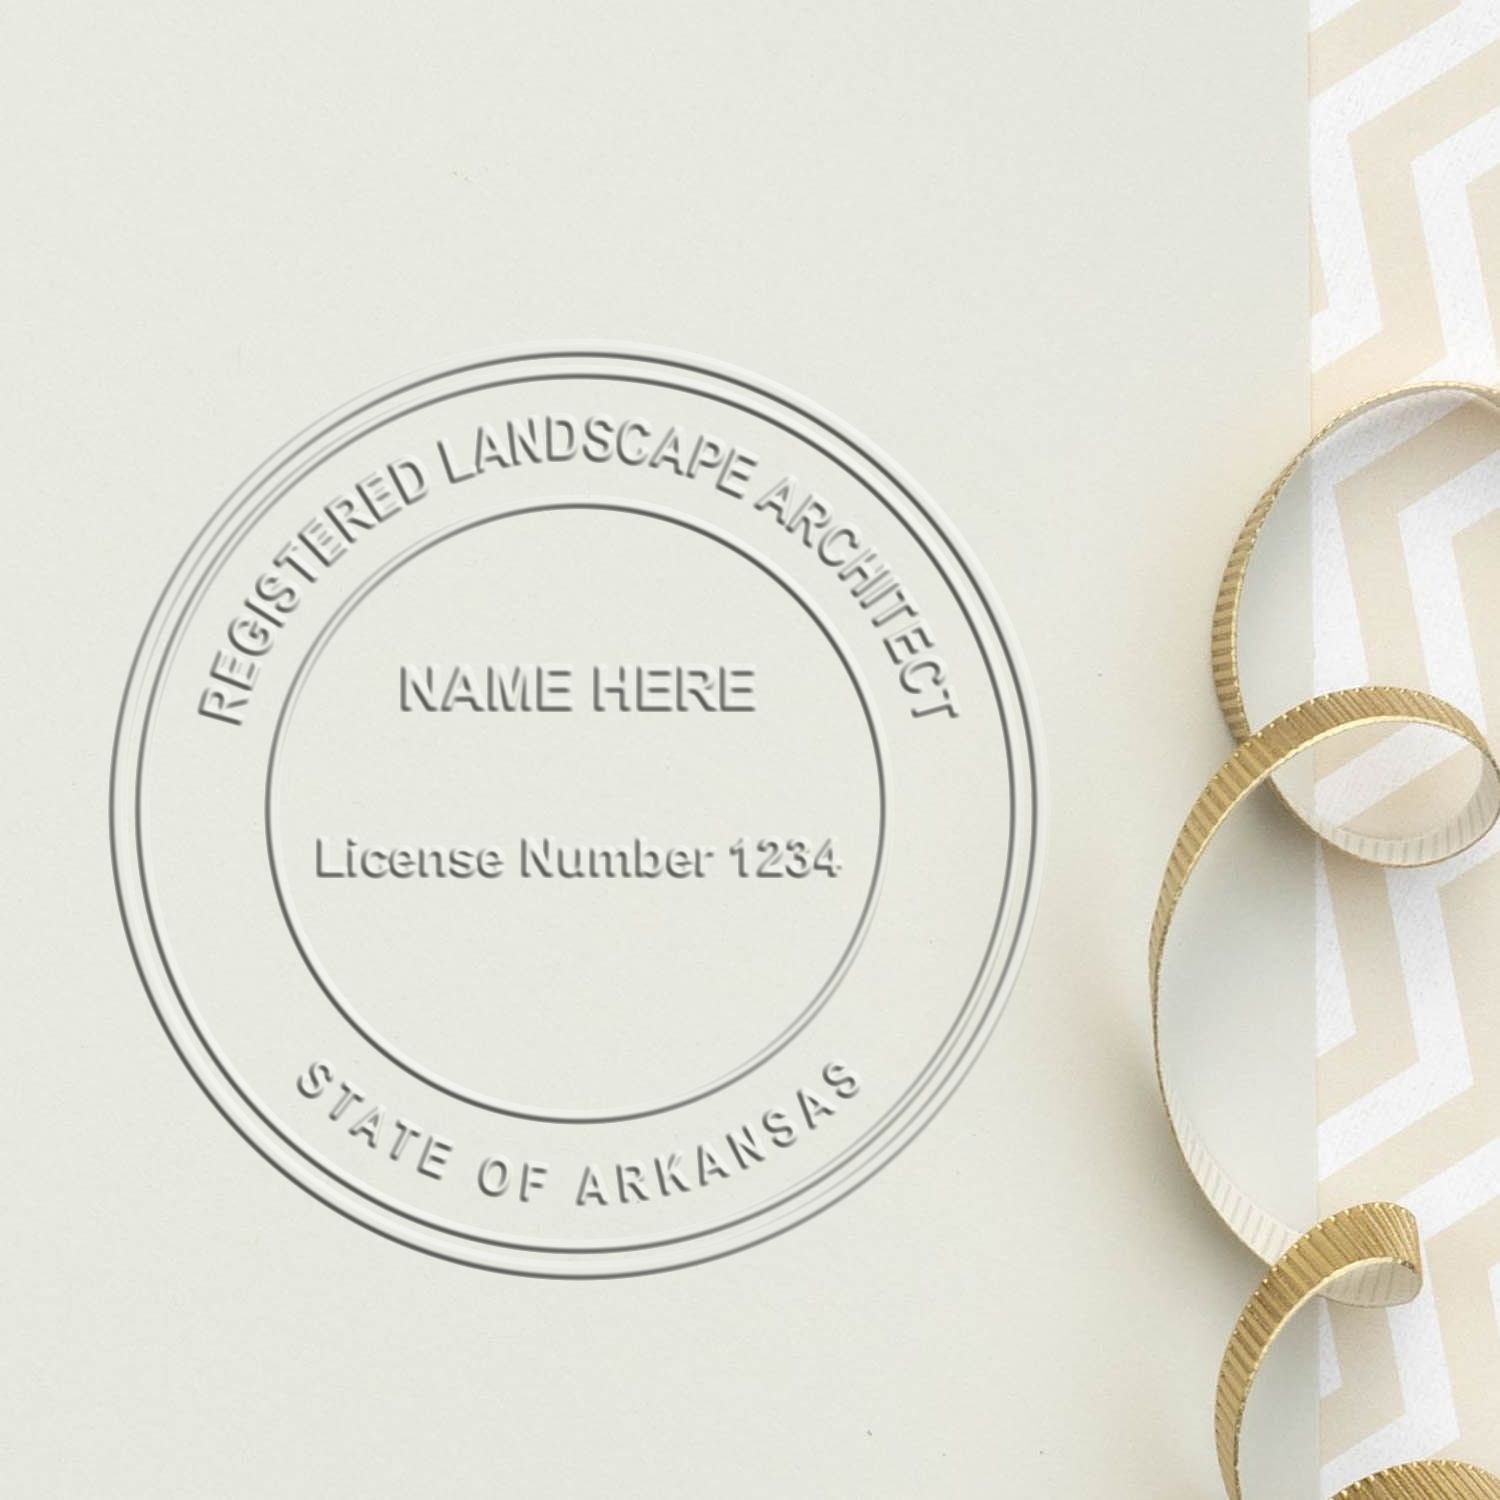 An in use photo of the Hybrid Arkansas Landscape Architect Seal showing a sample imprint on a cardstock